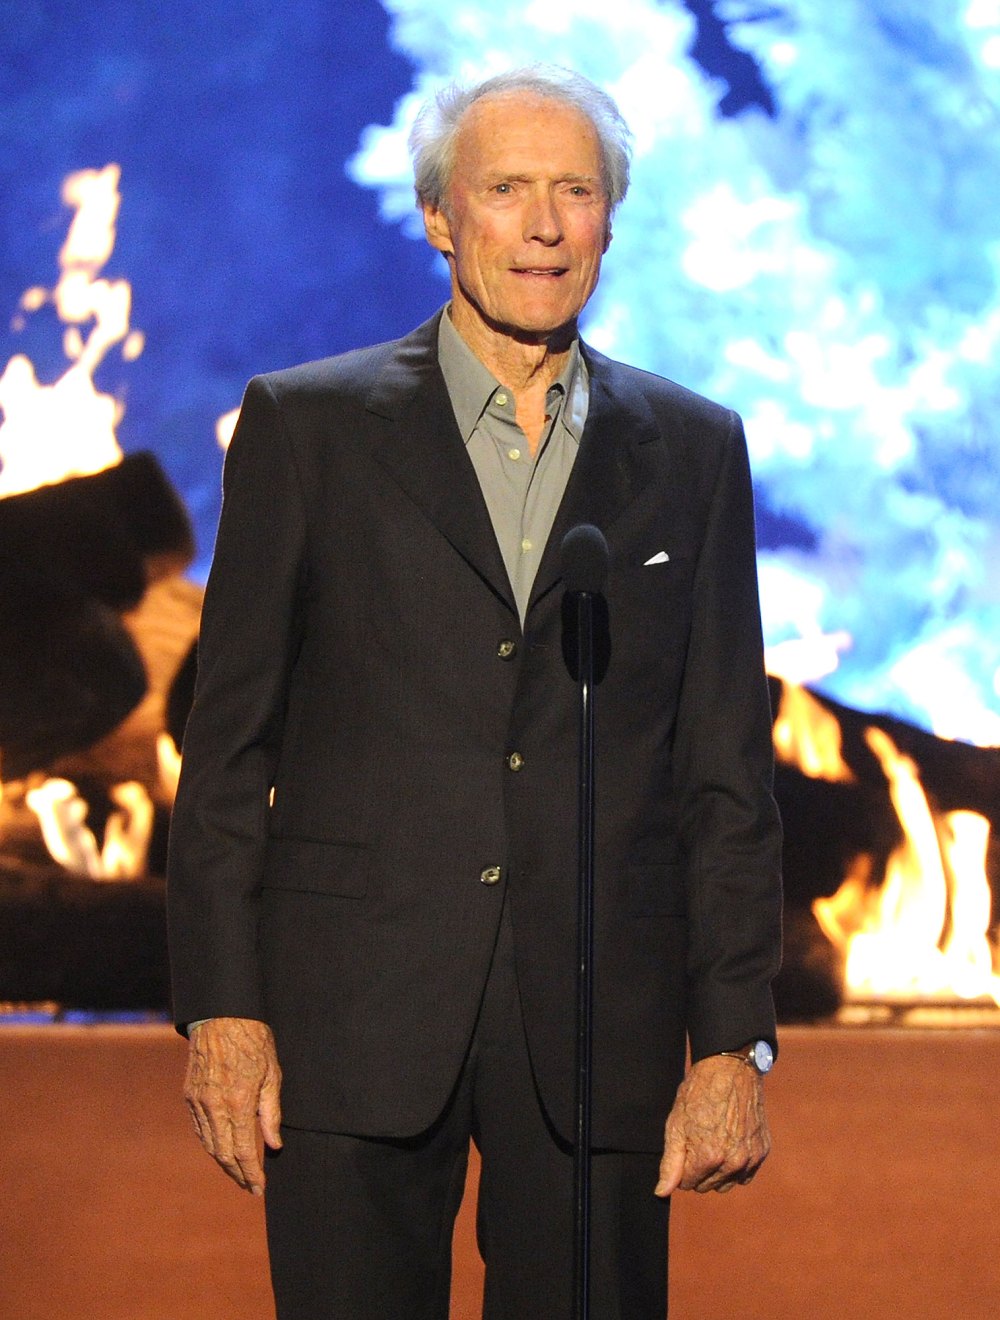 Clint Eastwood’s Caitlyn Jenner Joke Will Be Cut From Spike TV’s Guys Choice Awards Broadcast